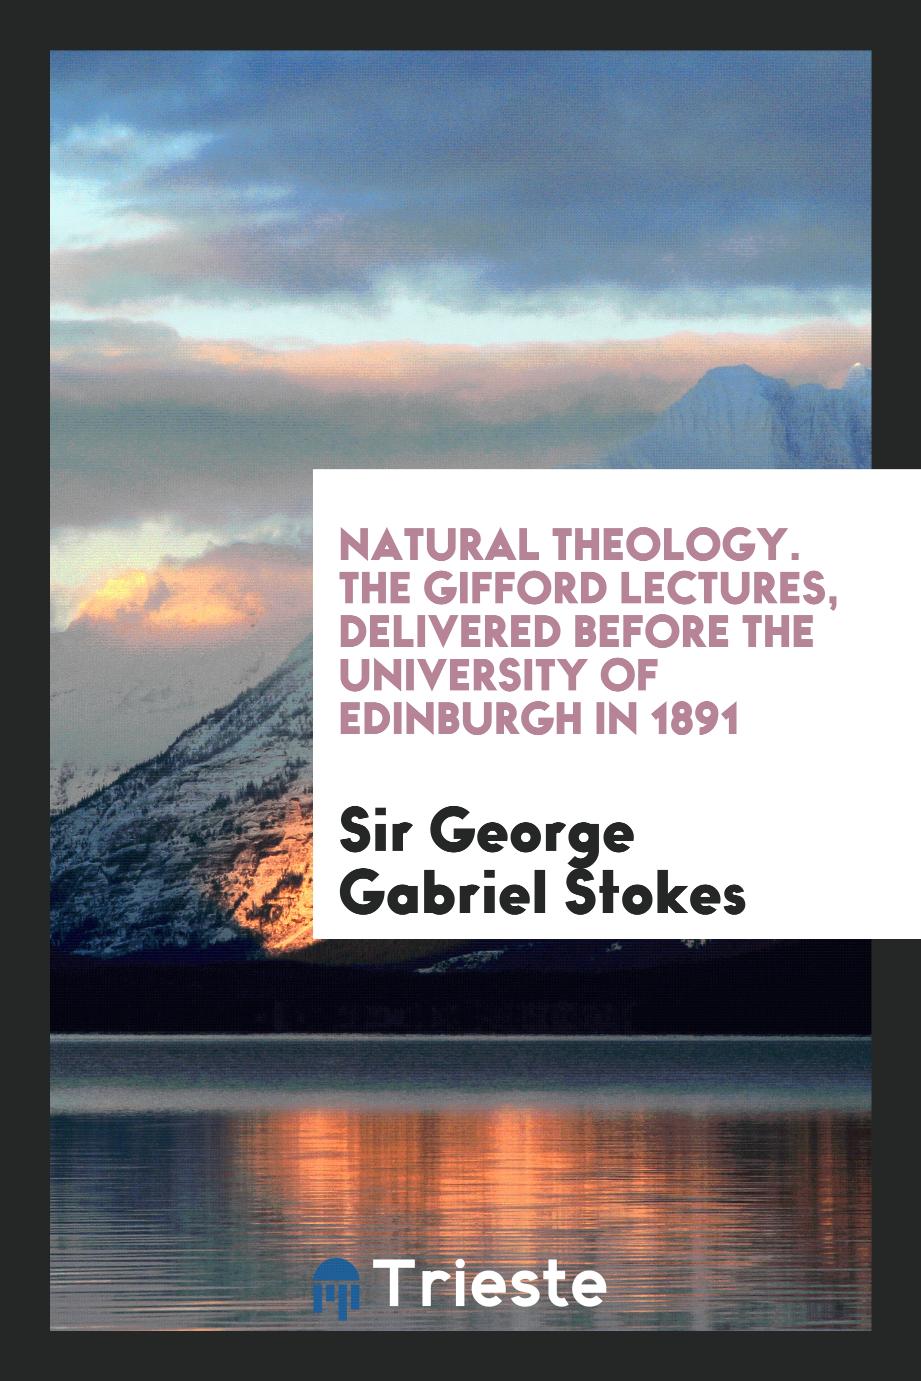 Natural theology. The Gifford lectures, delivered before the University of Edinburgh in 1891